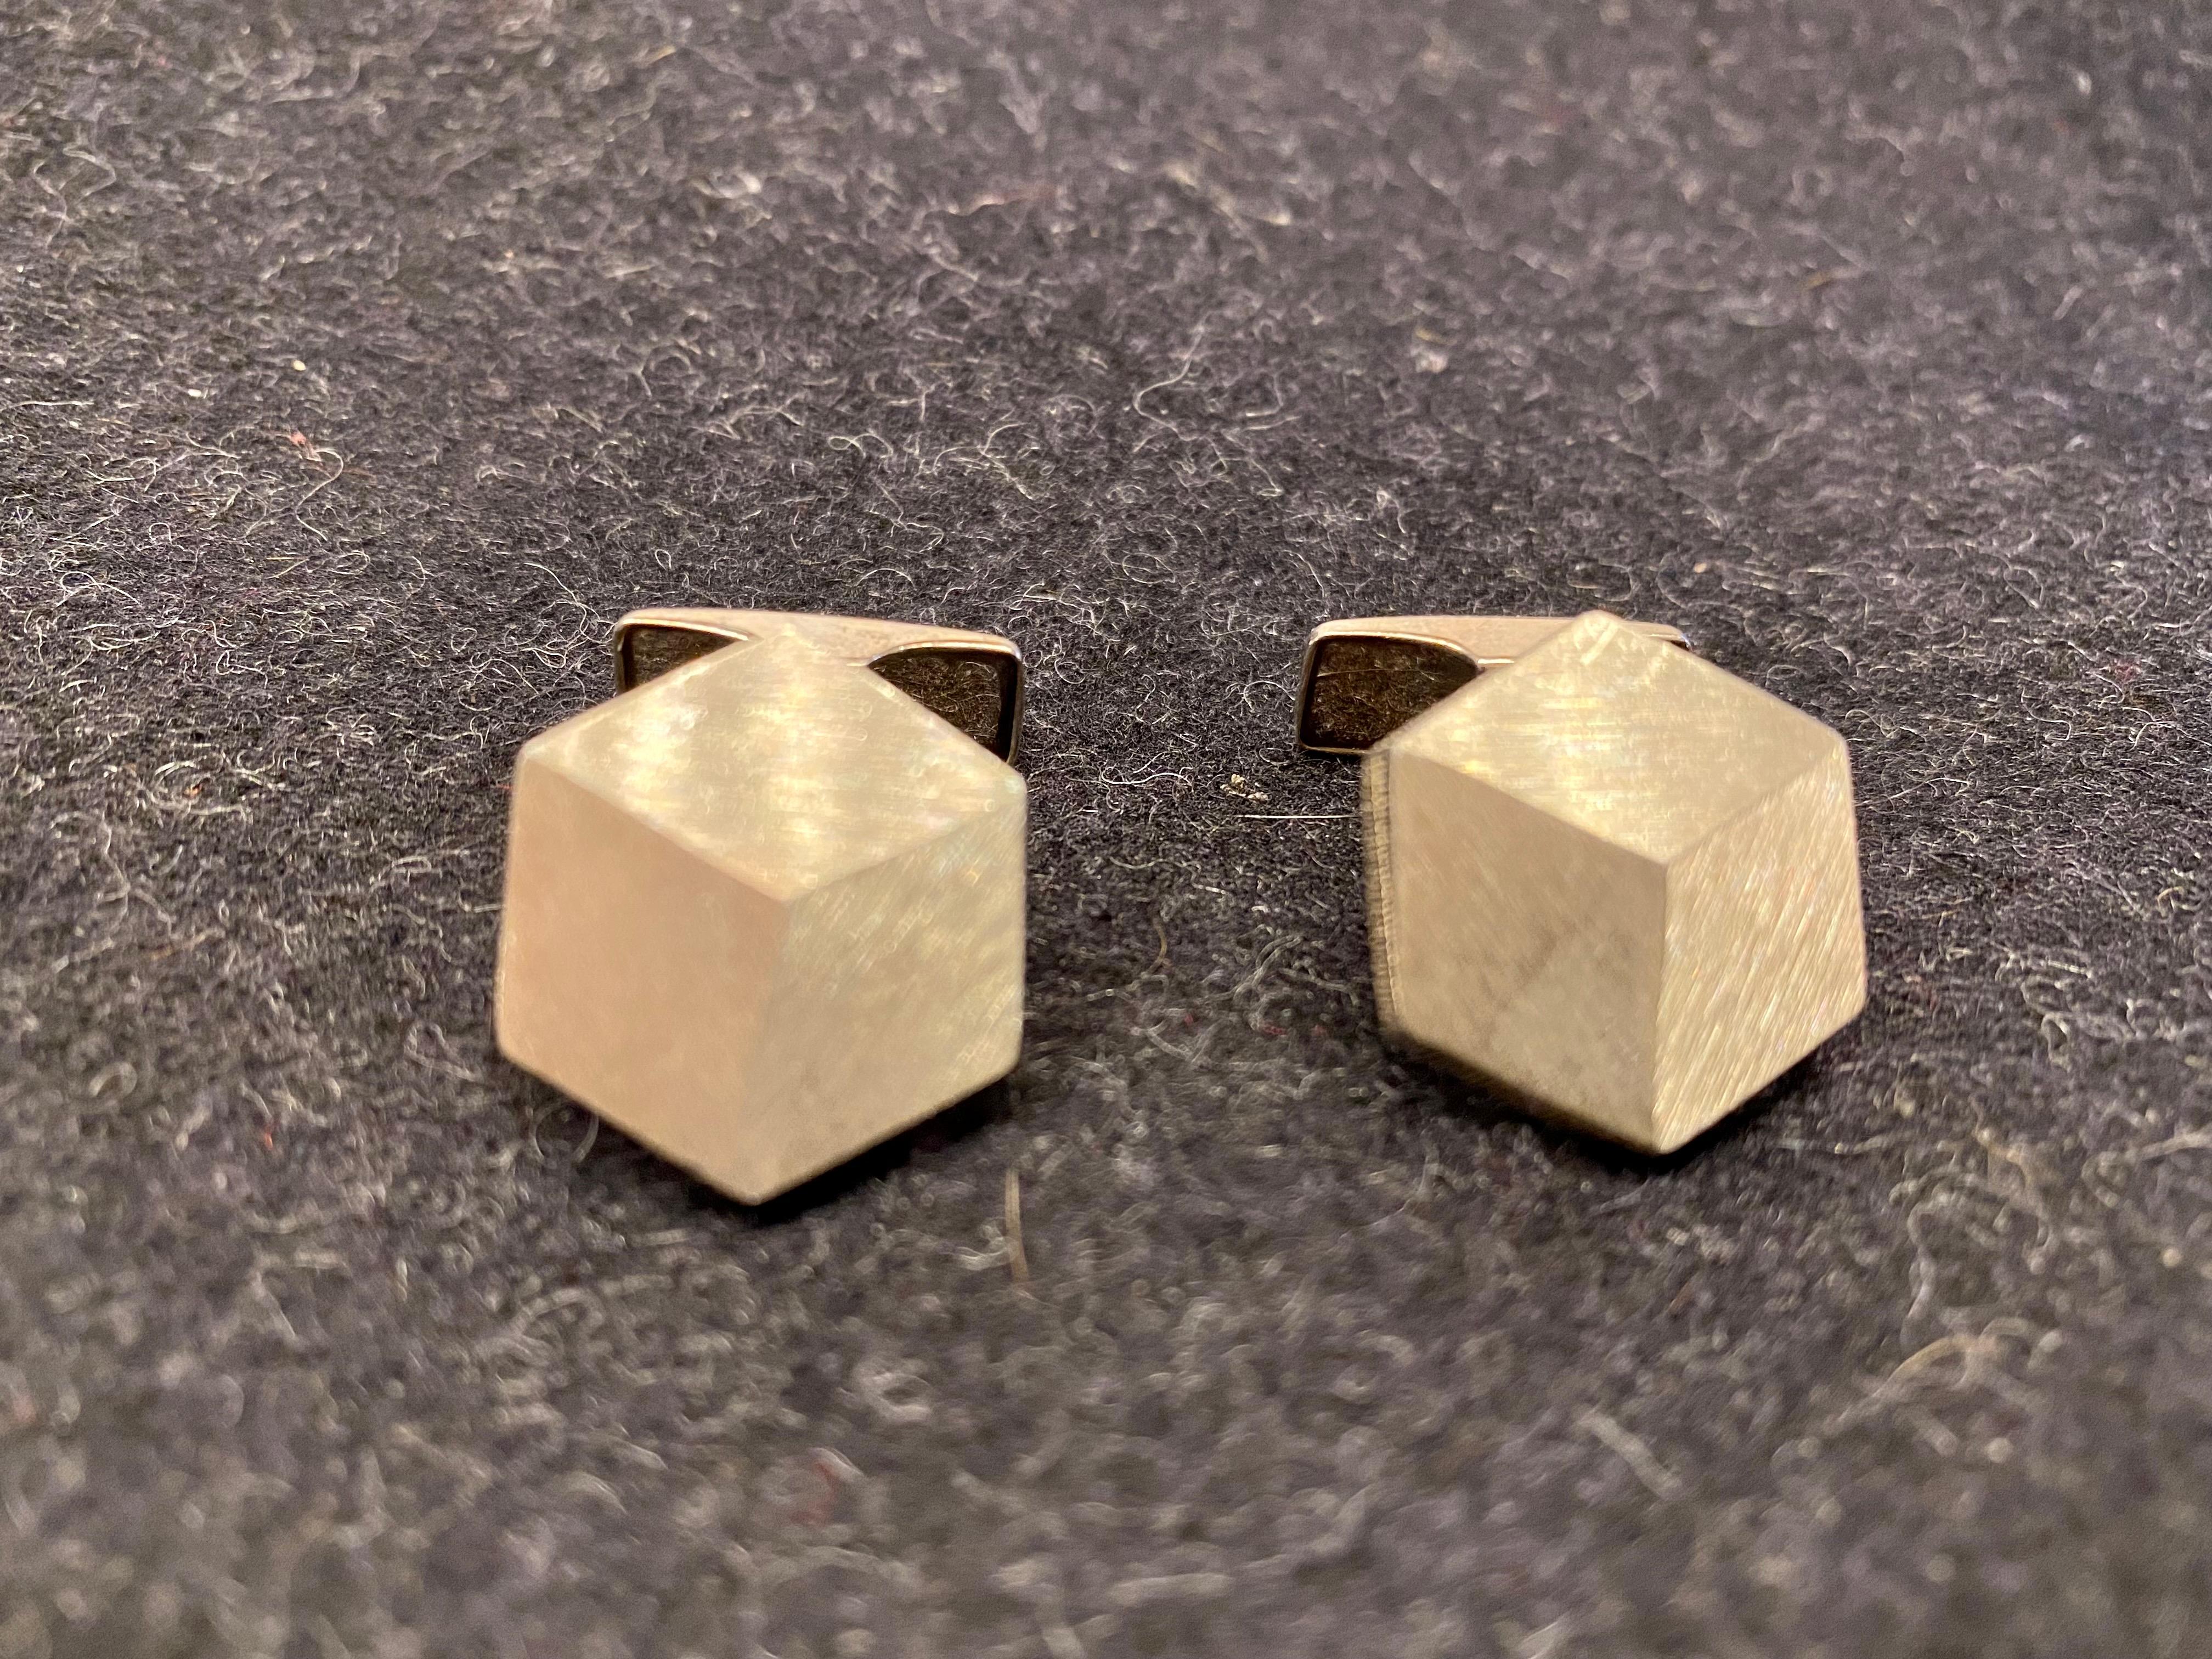 Sterling Silver Cufflinks Turku Salovaara Finland 1983
Great old cuffs.
Really in good condition.
6 angular.
The great effect looks like a 3D effect from Cube
925H Sterling Silver.
Made in Finland.
Turku
Salovaara Oy